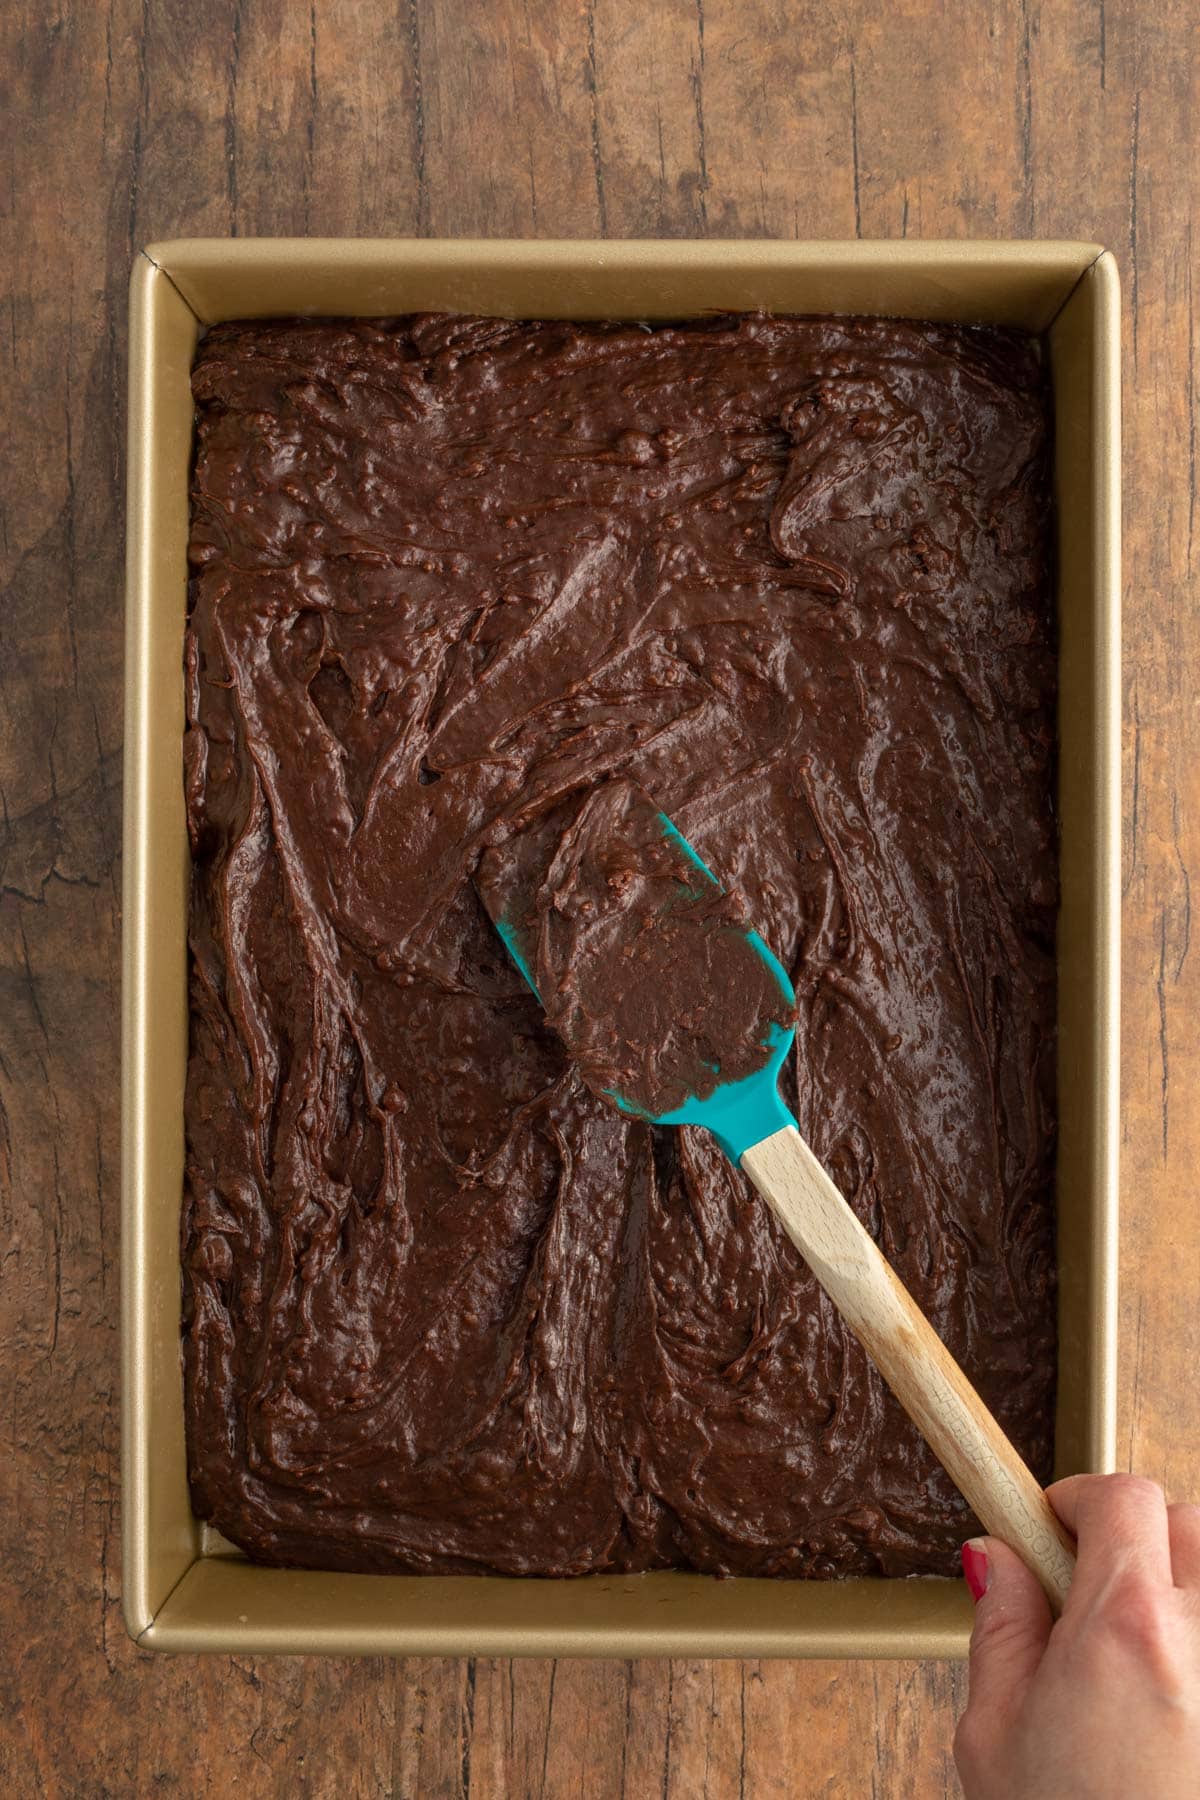 Cakey Brownies spreading batter in baking pan with spatula